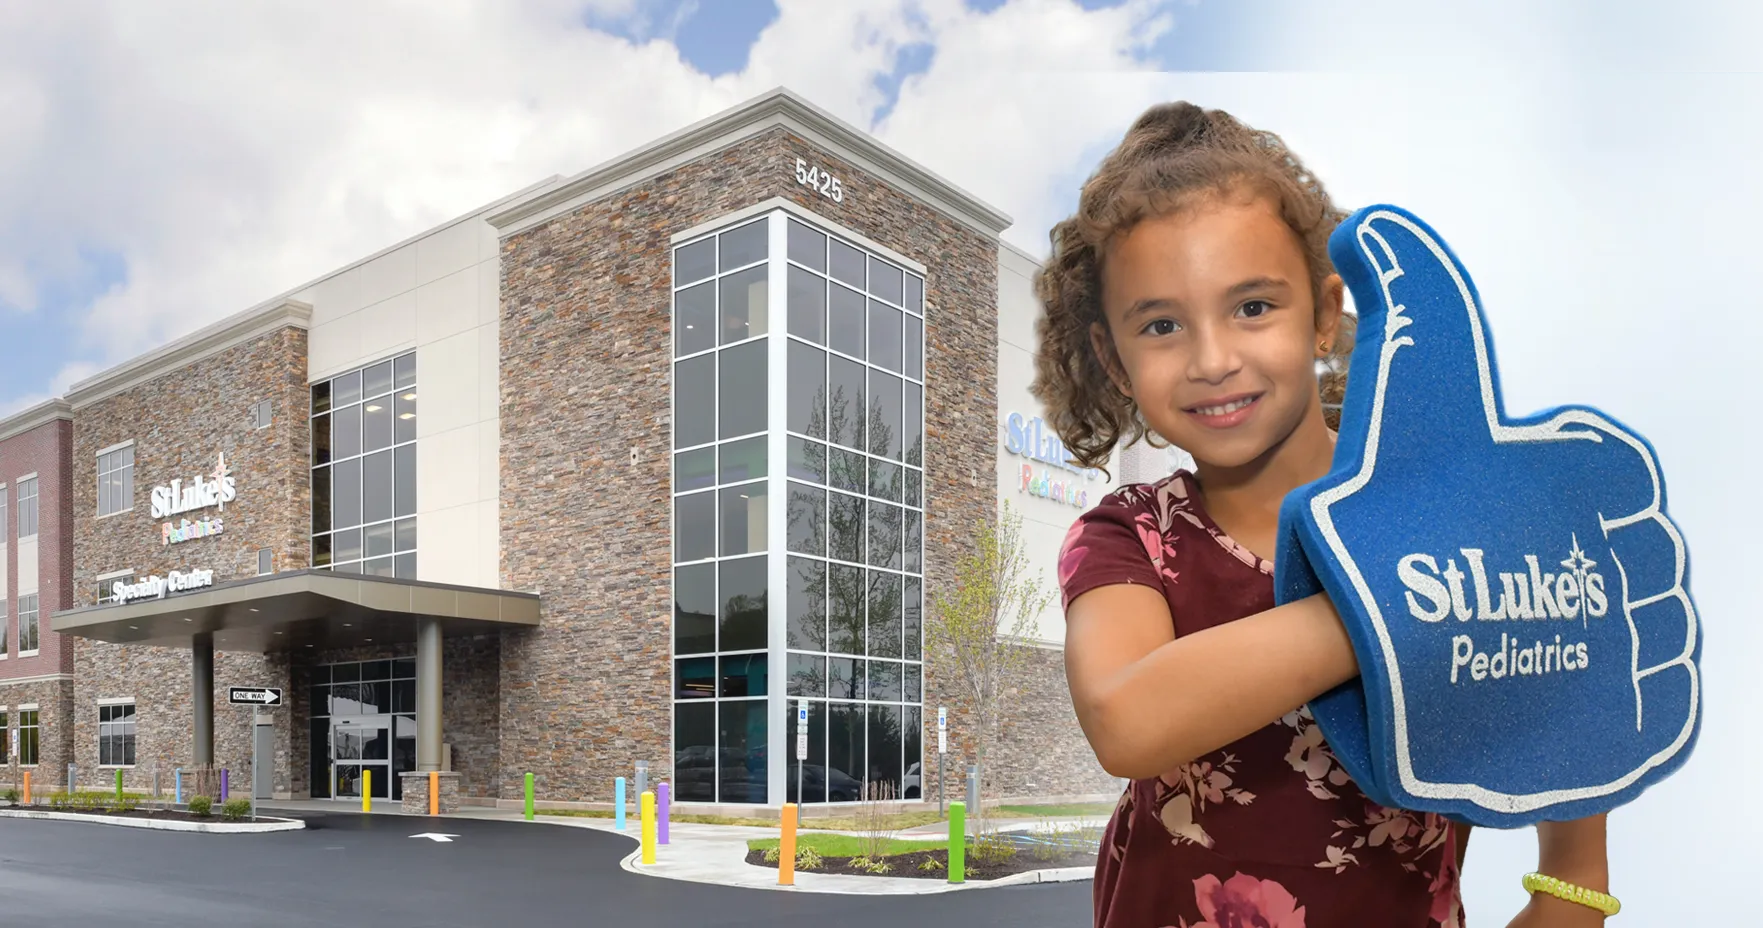 Young girl holding blue thumbs up foam hand while standing in front of a building